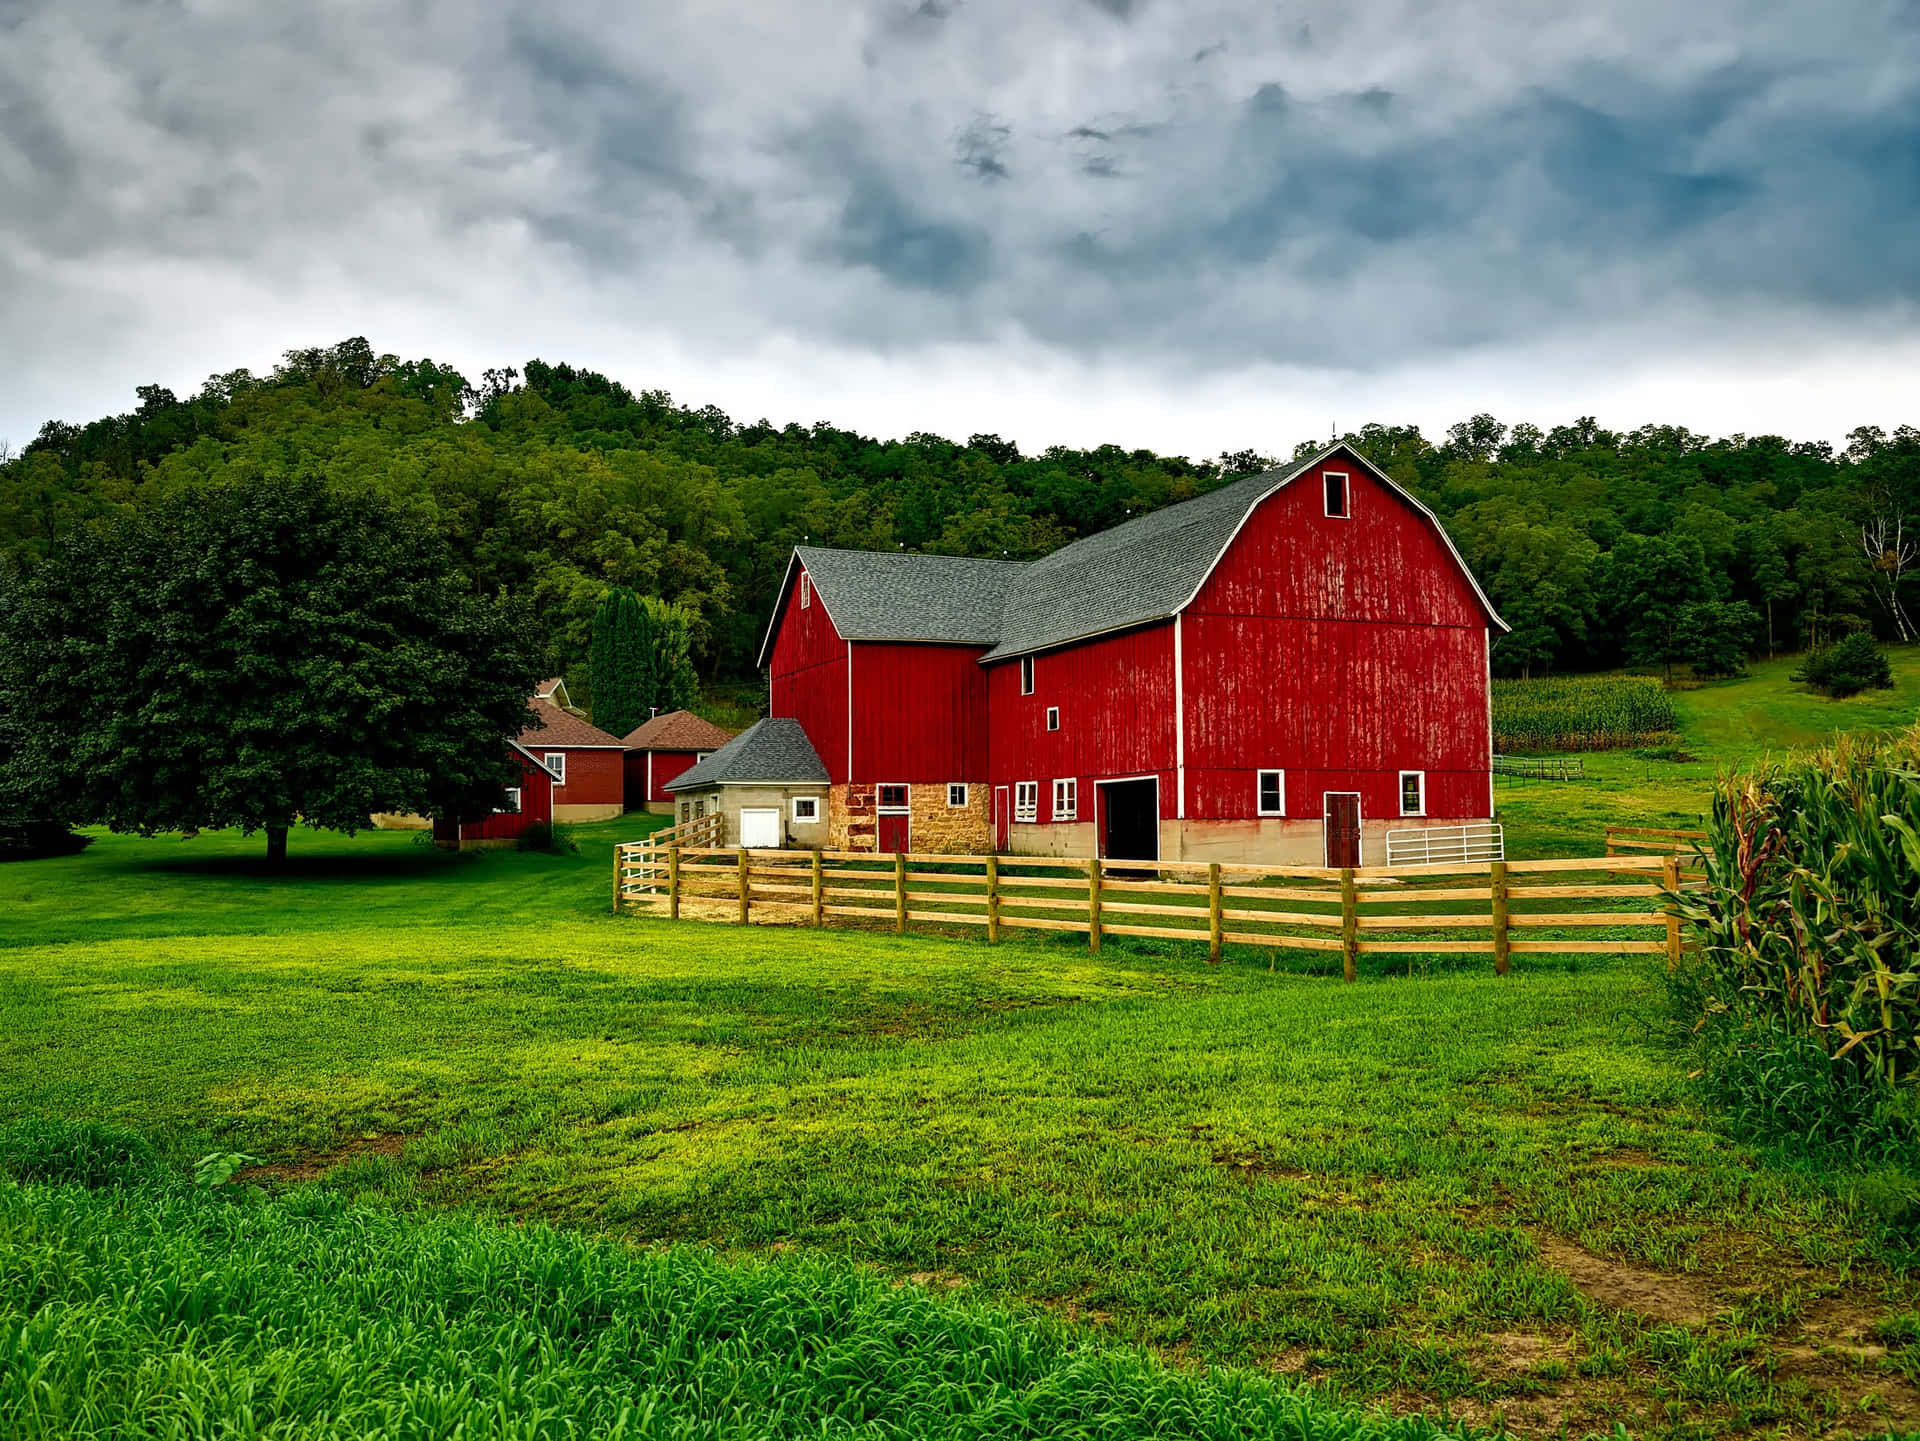 Picturesque Barn in the Beautiful Countryside